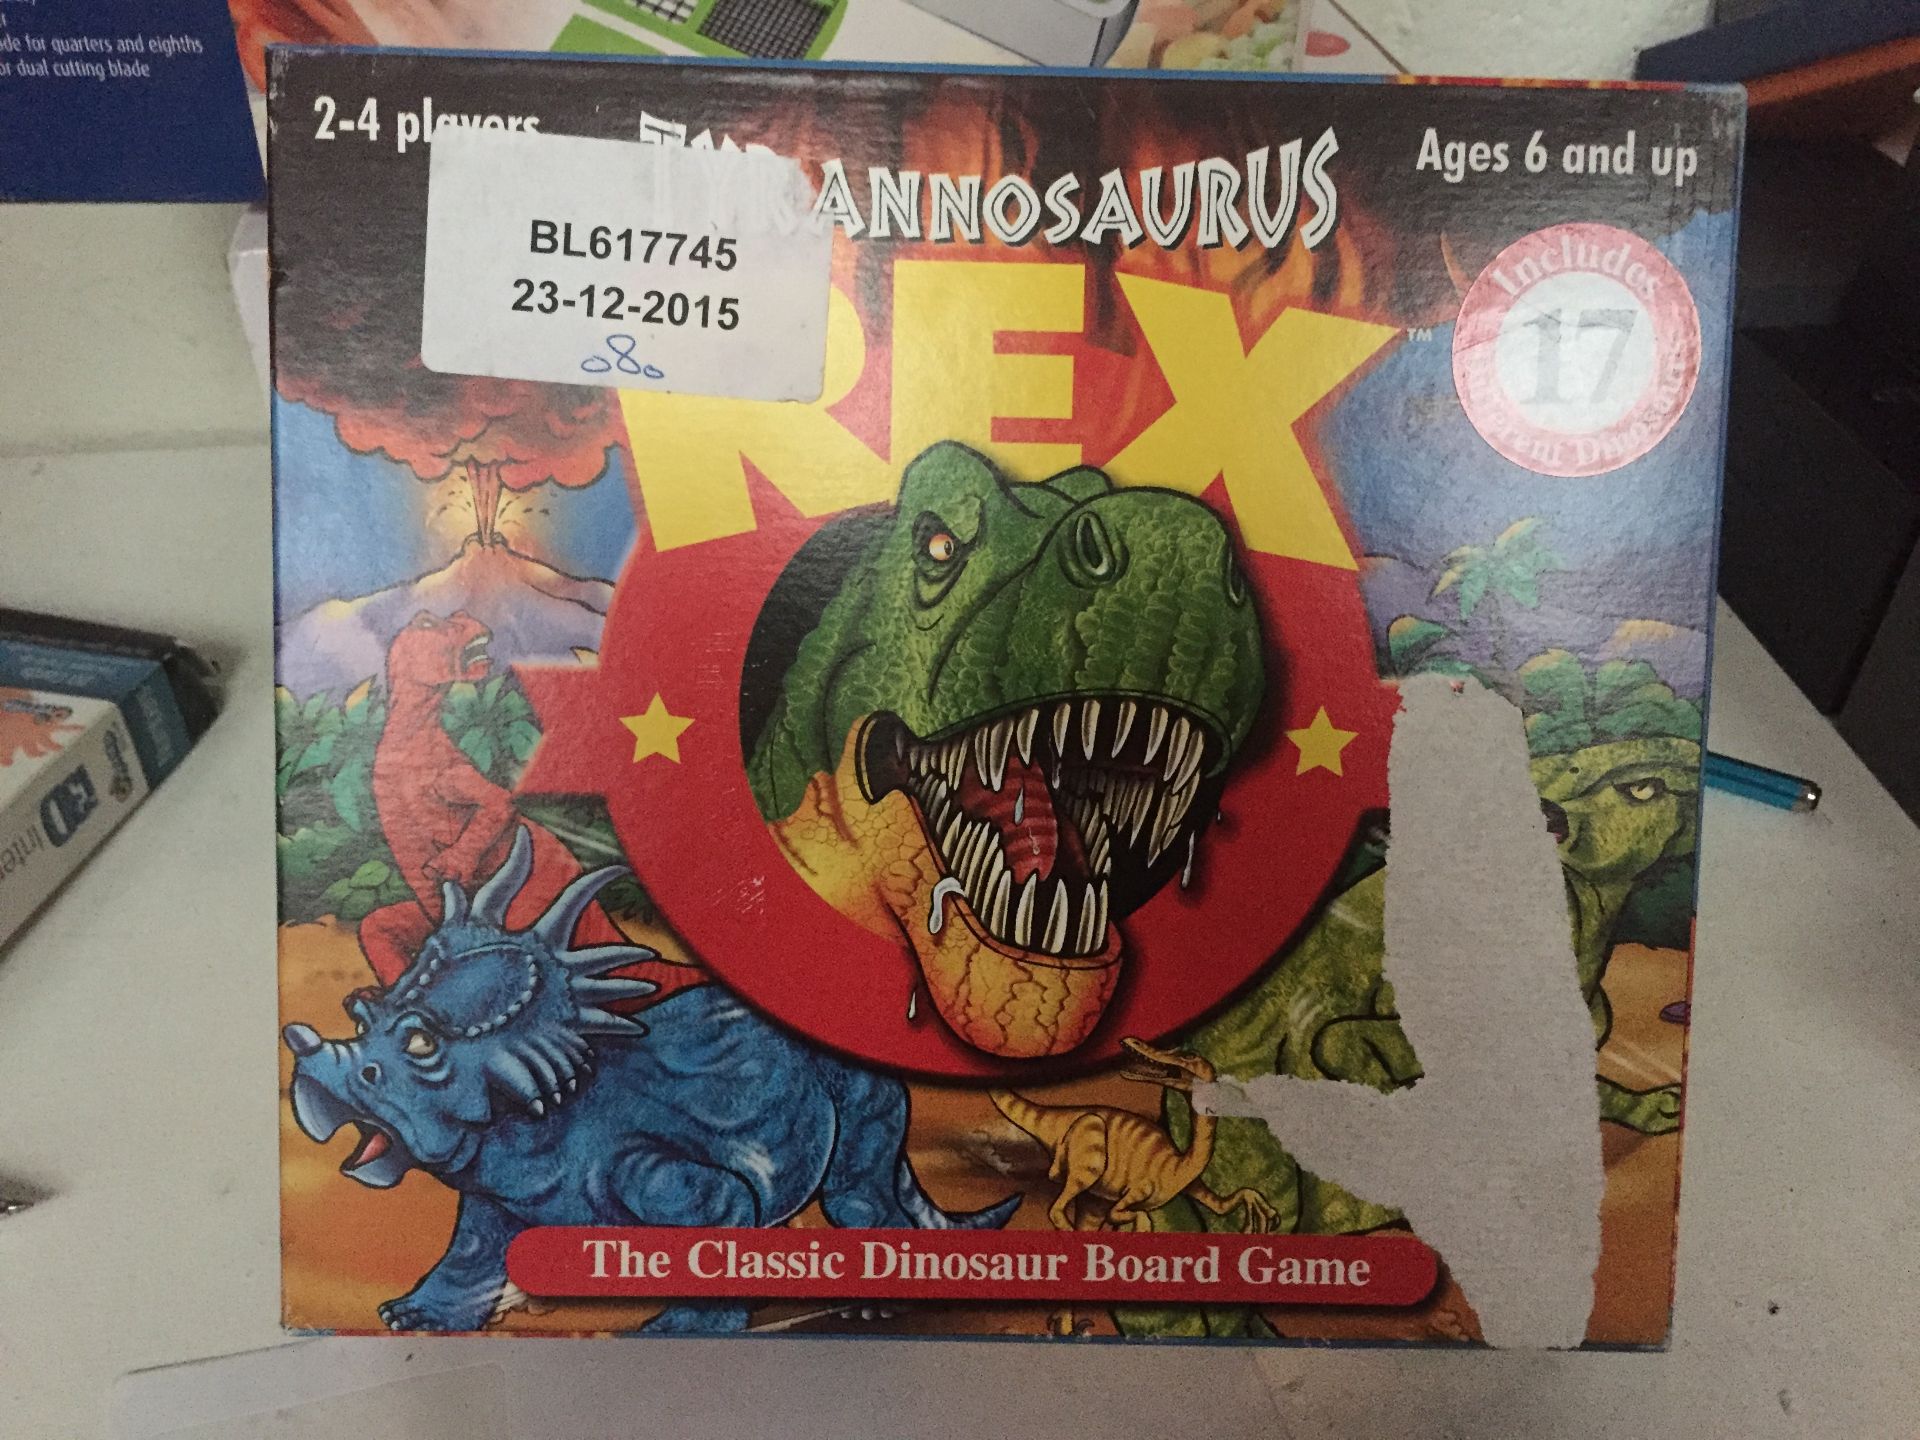 The Classic Dinosaur Board Game